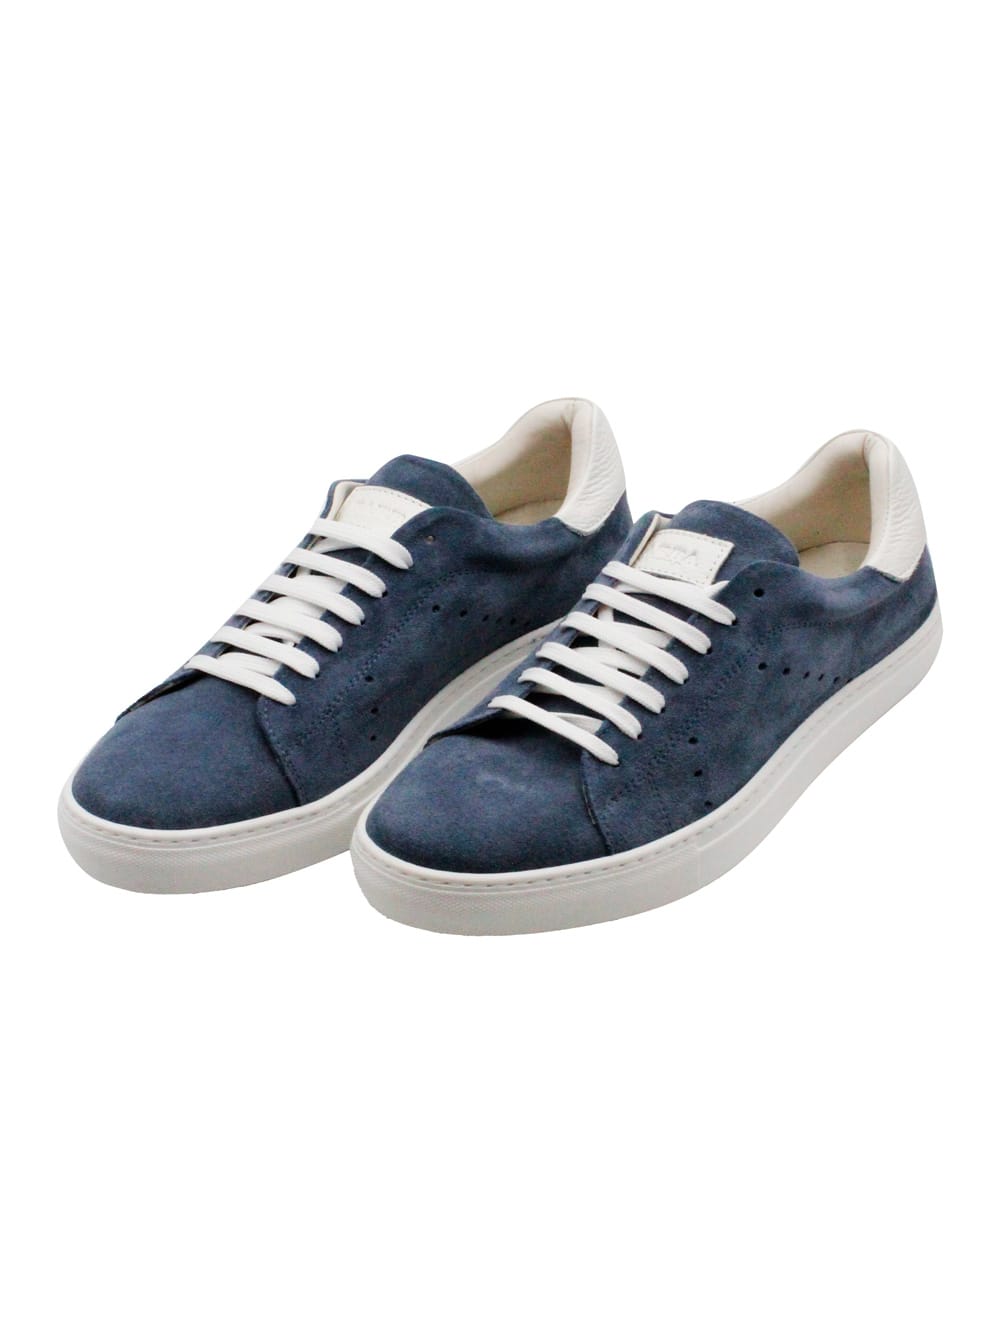 Sneakers In Soft And Fine Perforated Suede With Lace Closure And Leather Rear Part